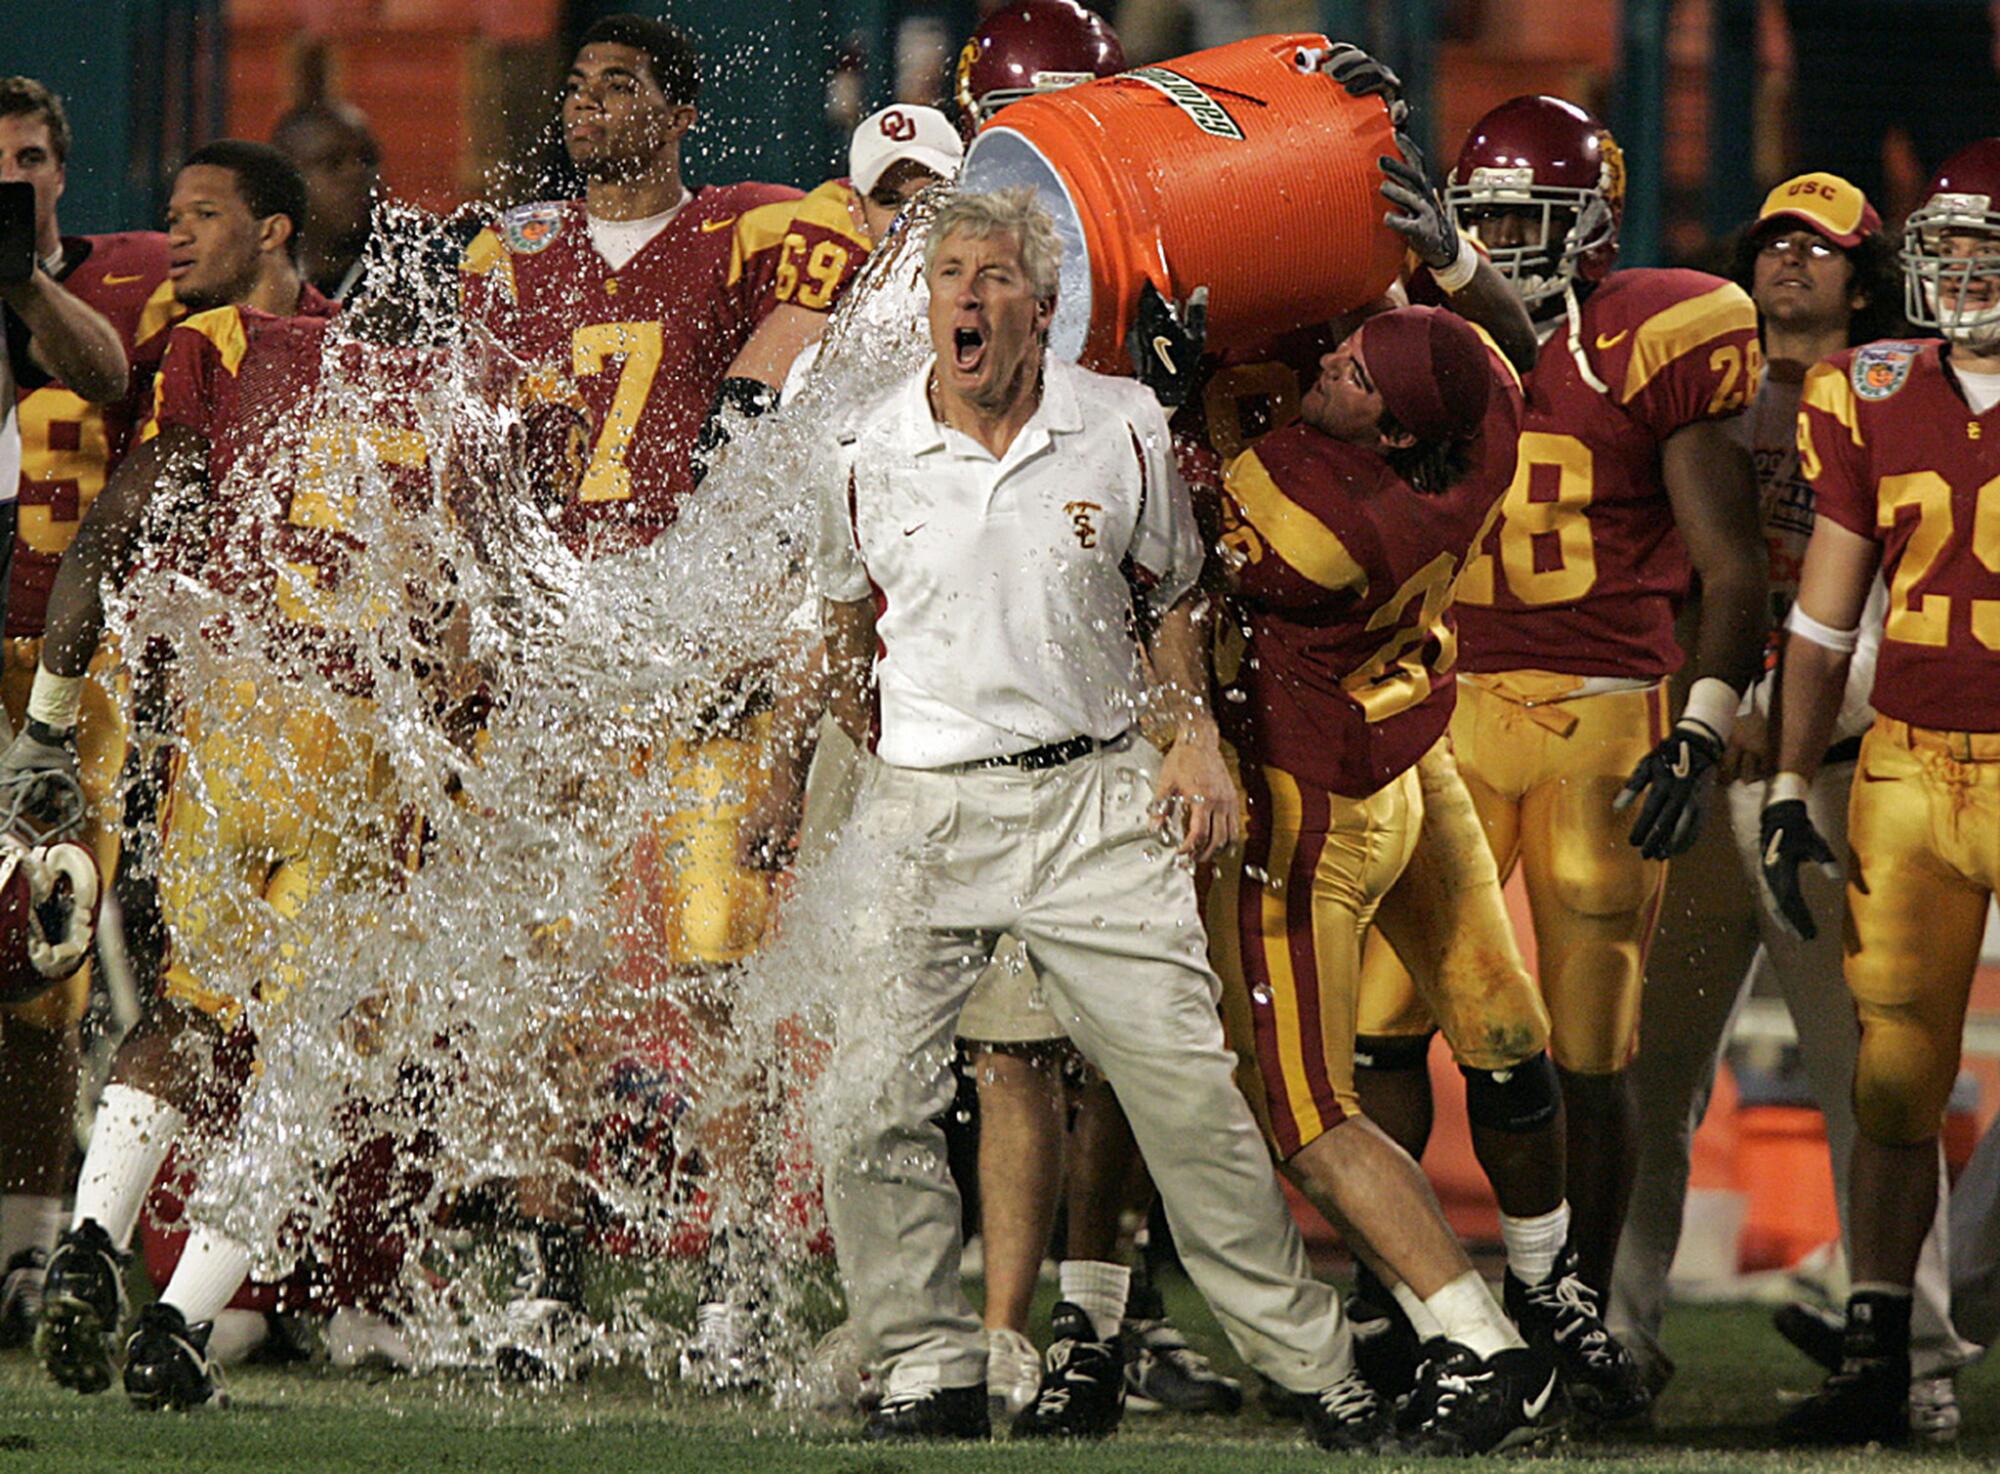 Pete Carroll gets doused in the waning moments of the Trojans' victory over Oklahoma in the 2005 Orange Bowl.